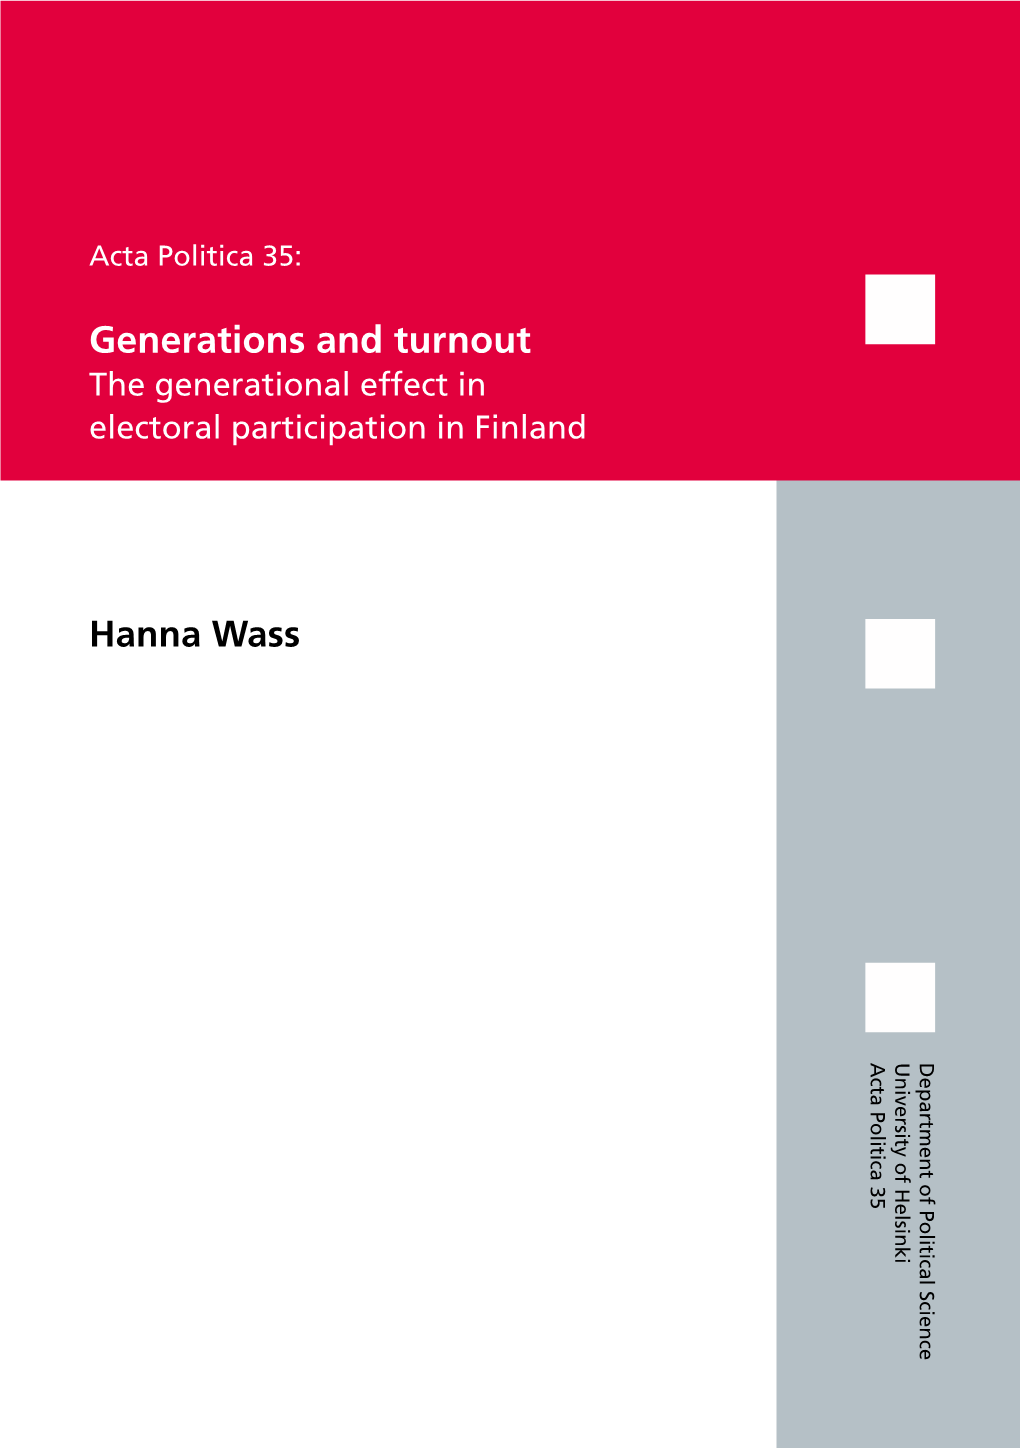 The Generational Effect in Electoral Participation in Finland